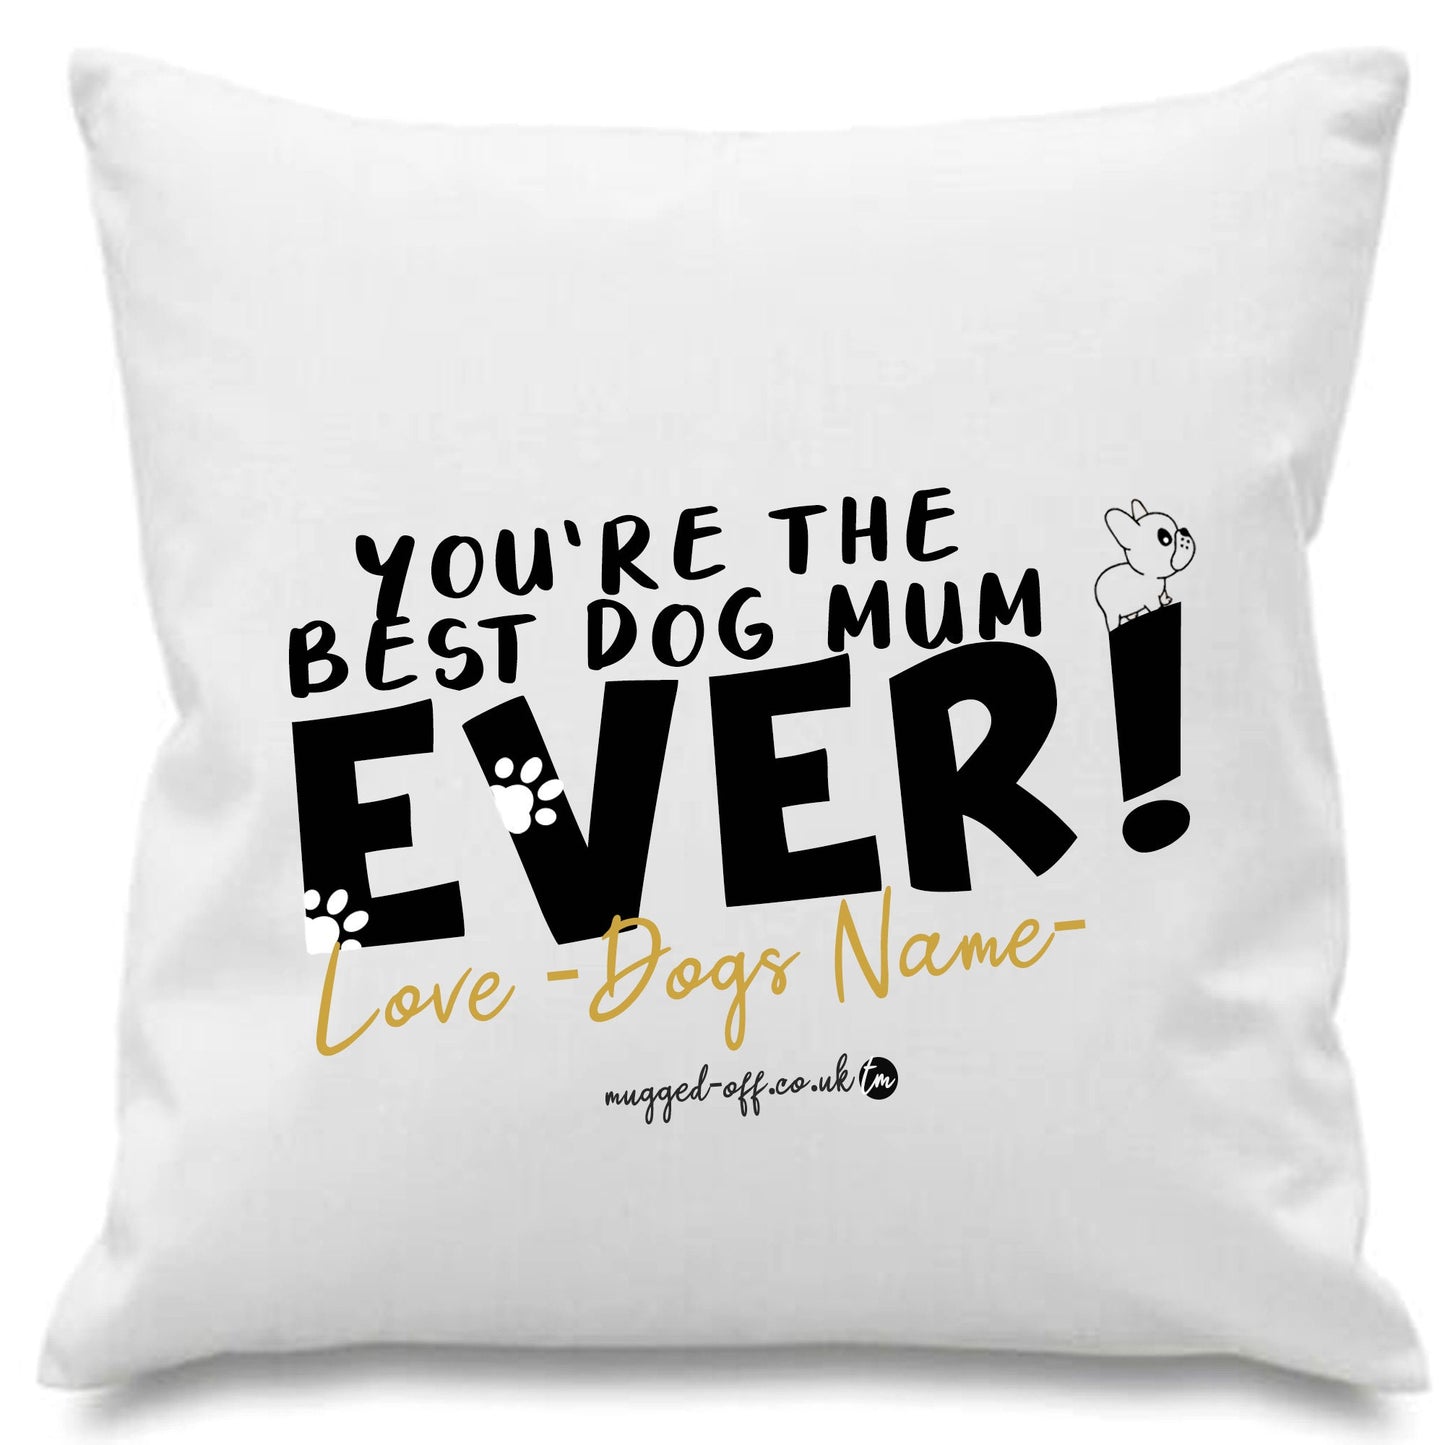 Dog Mum Cushion Cover - cushion cover personalised from Dog name gift Birthday Gift Christmas